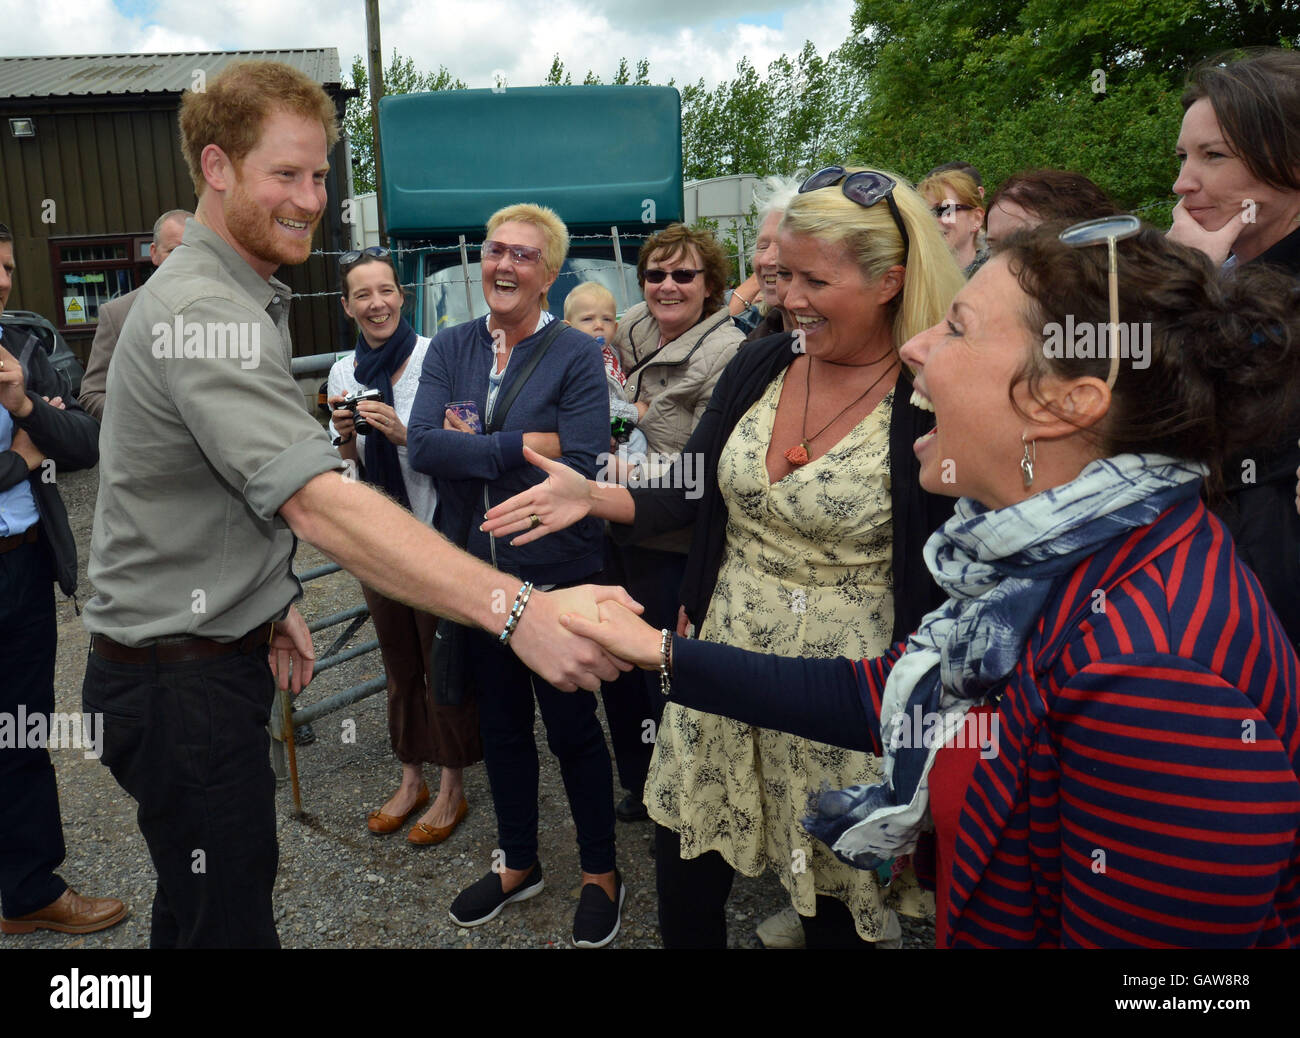 Prince Harry visits Cast North West, an angling venue in Wigan that helps enhance the employability and educational opportunities of disadvantaged young people, as he continues to promote sport as a means for social development. Stock Photo